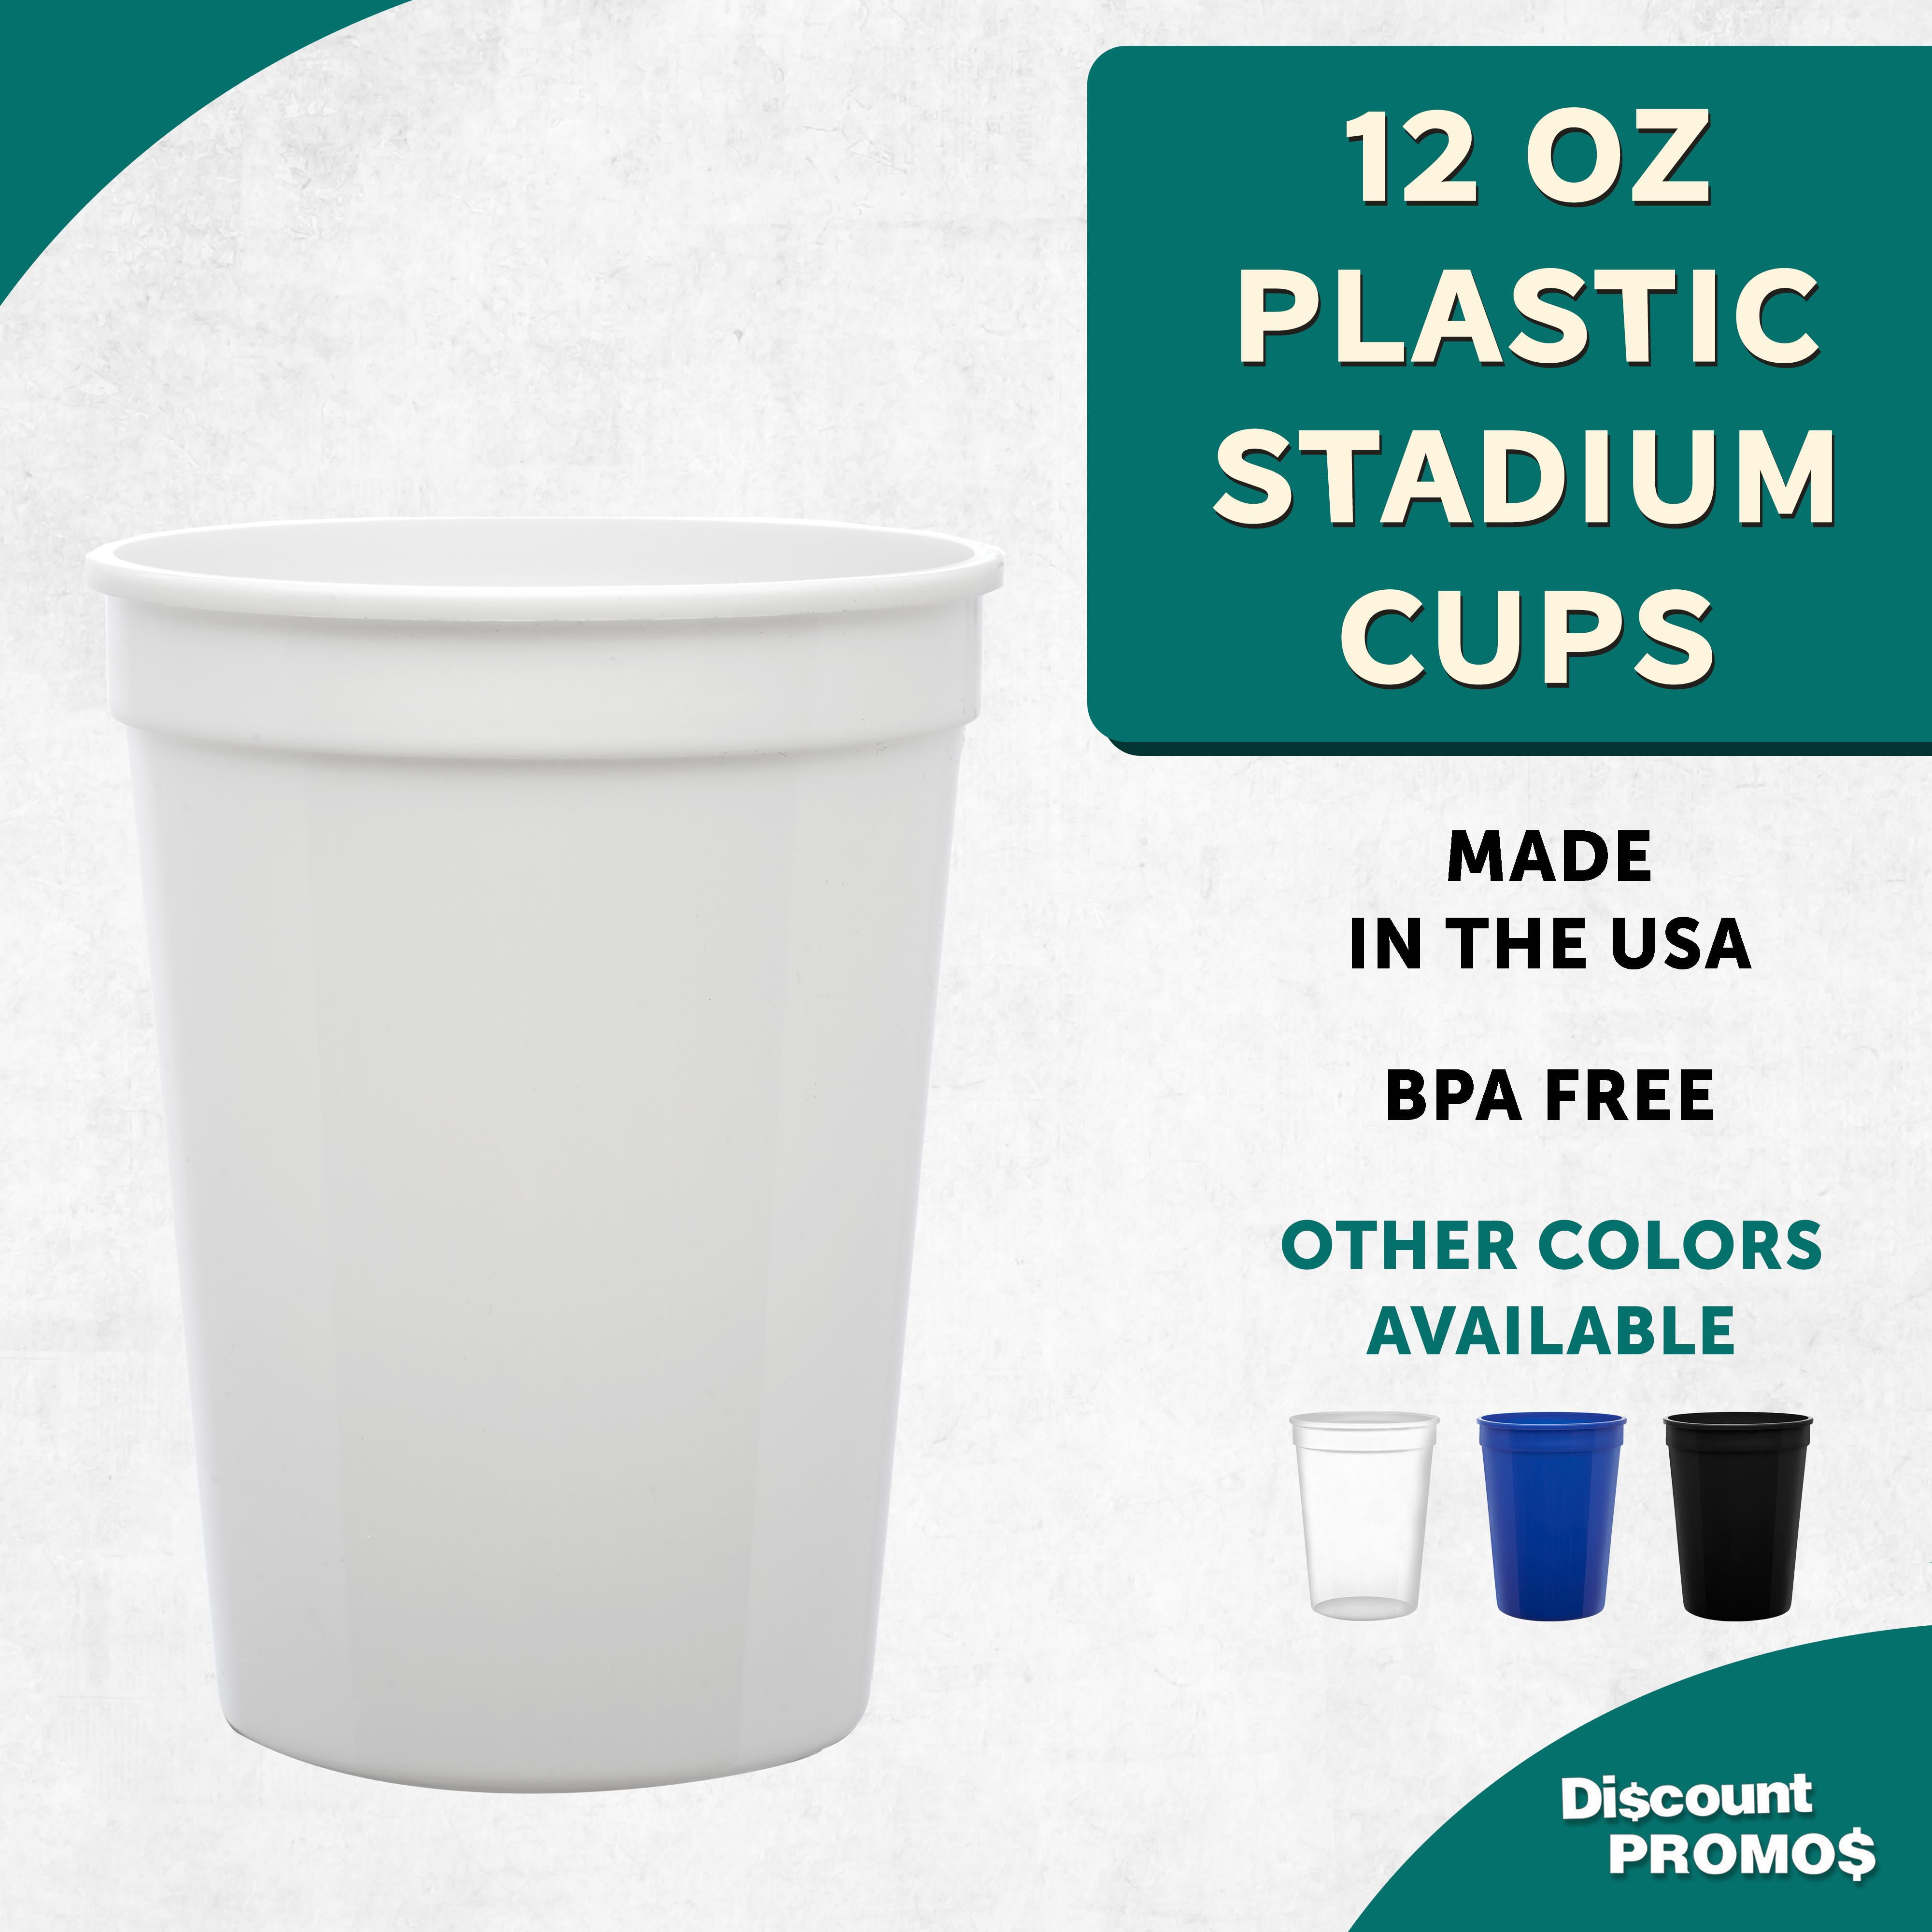 CSBD Stadium 12 oz. Plastic Cups, 10 Pack, Blank Reusable Drink Tumblers  for Parties, Events, Market…See more CSBD Stadium 12 oz. Plastic Cups, 10